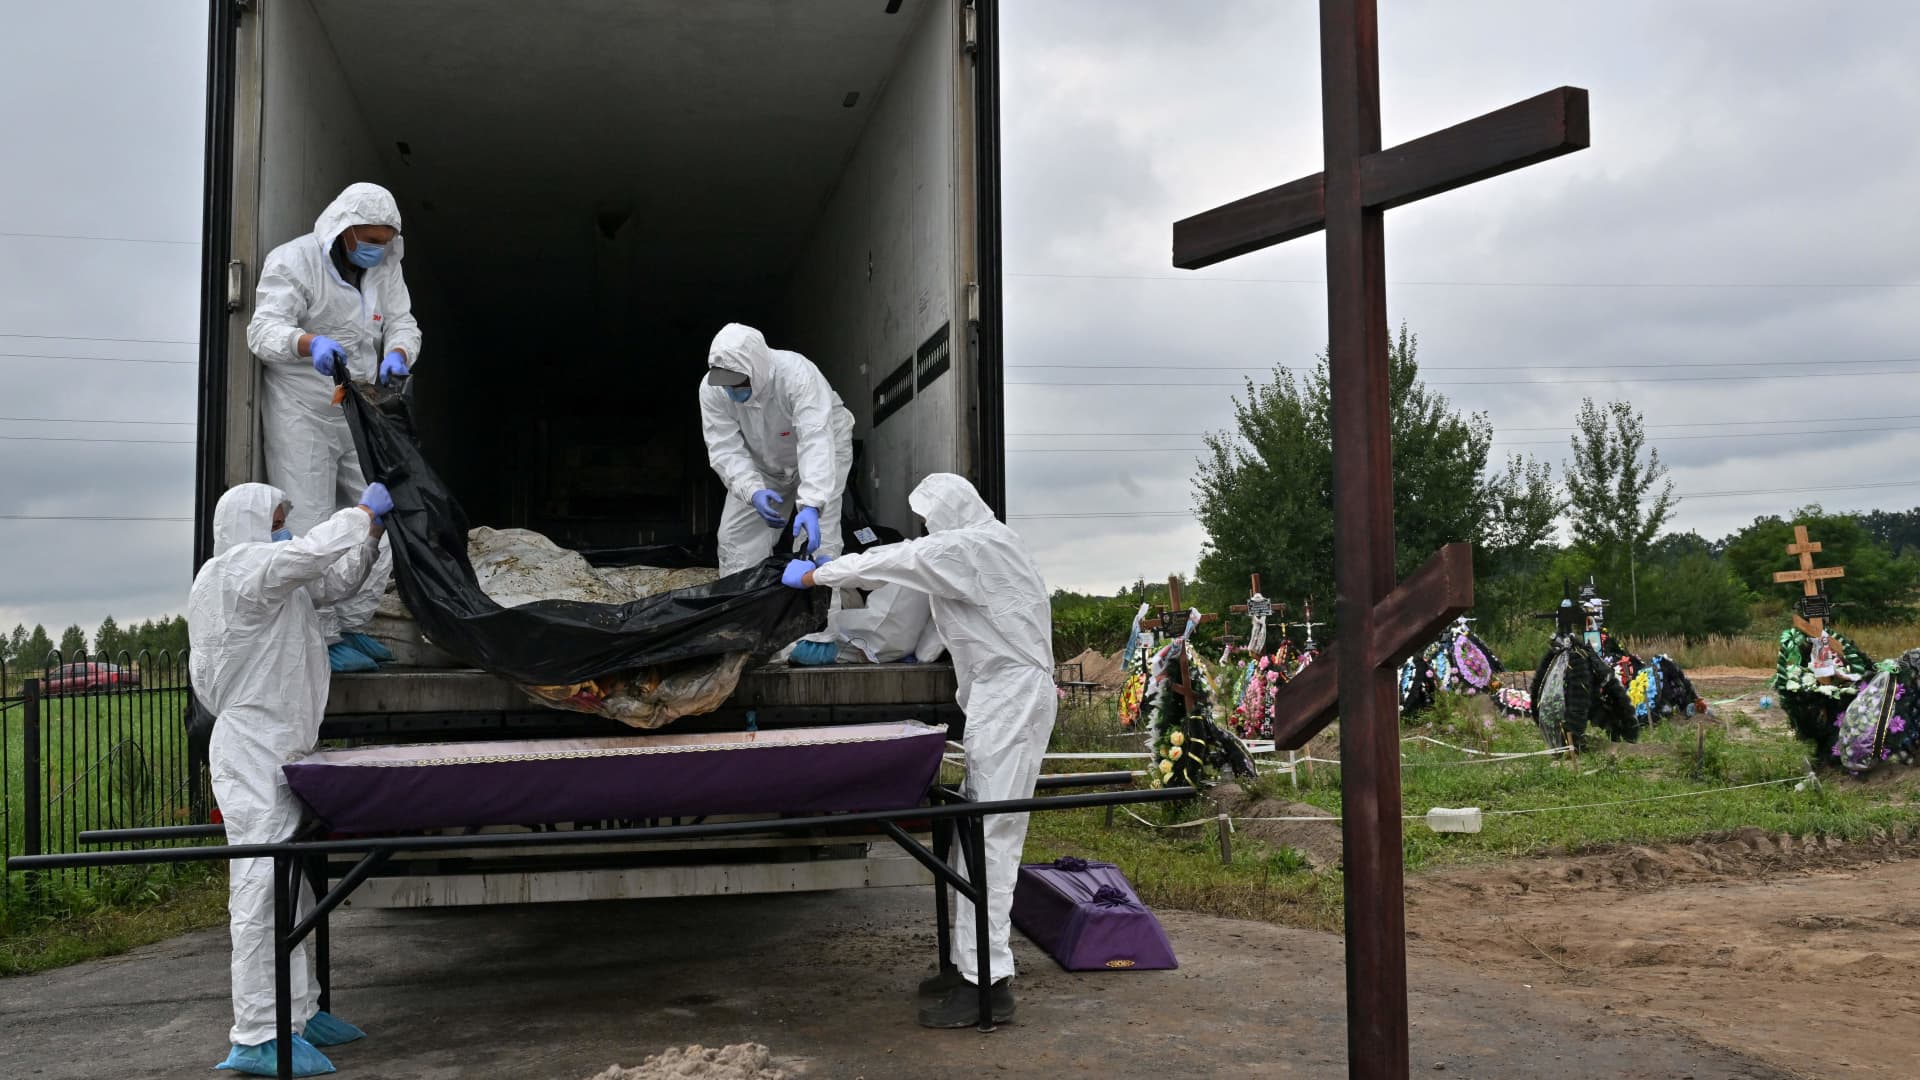 Municipal workers remove body bags of some twelve unidentified civilians from the back of a morgue container to be laid in coffins ready for burial at a local cemetary in the city of Bucha, Kyiv region, on August 11, 2022. 